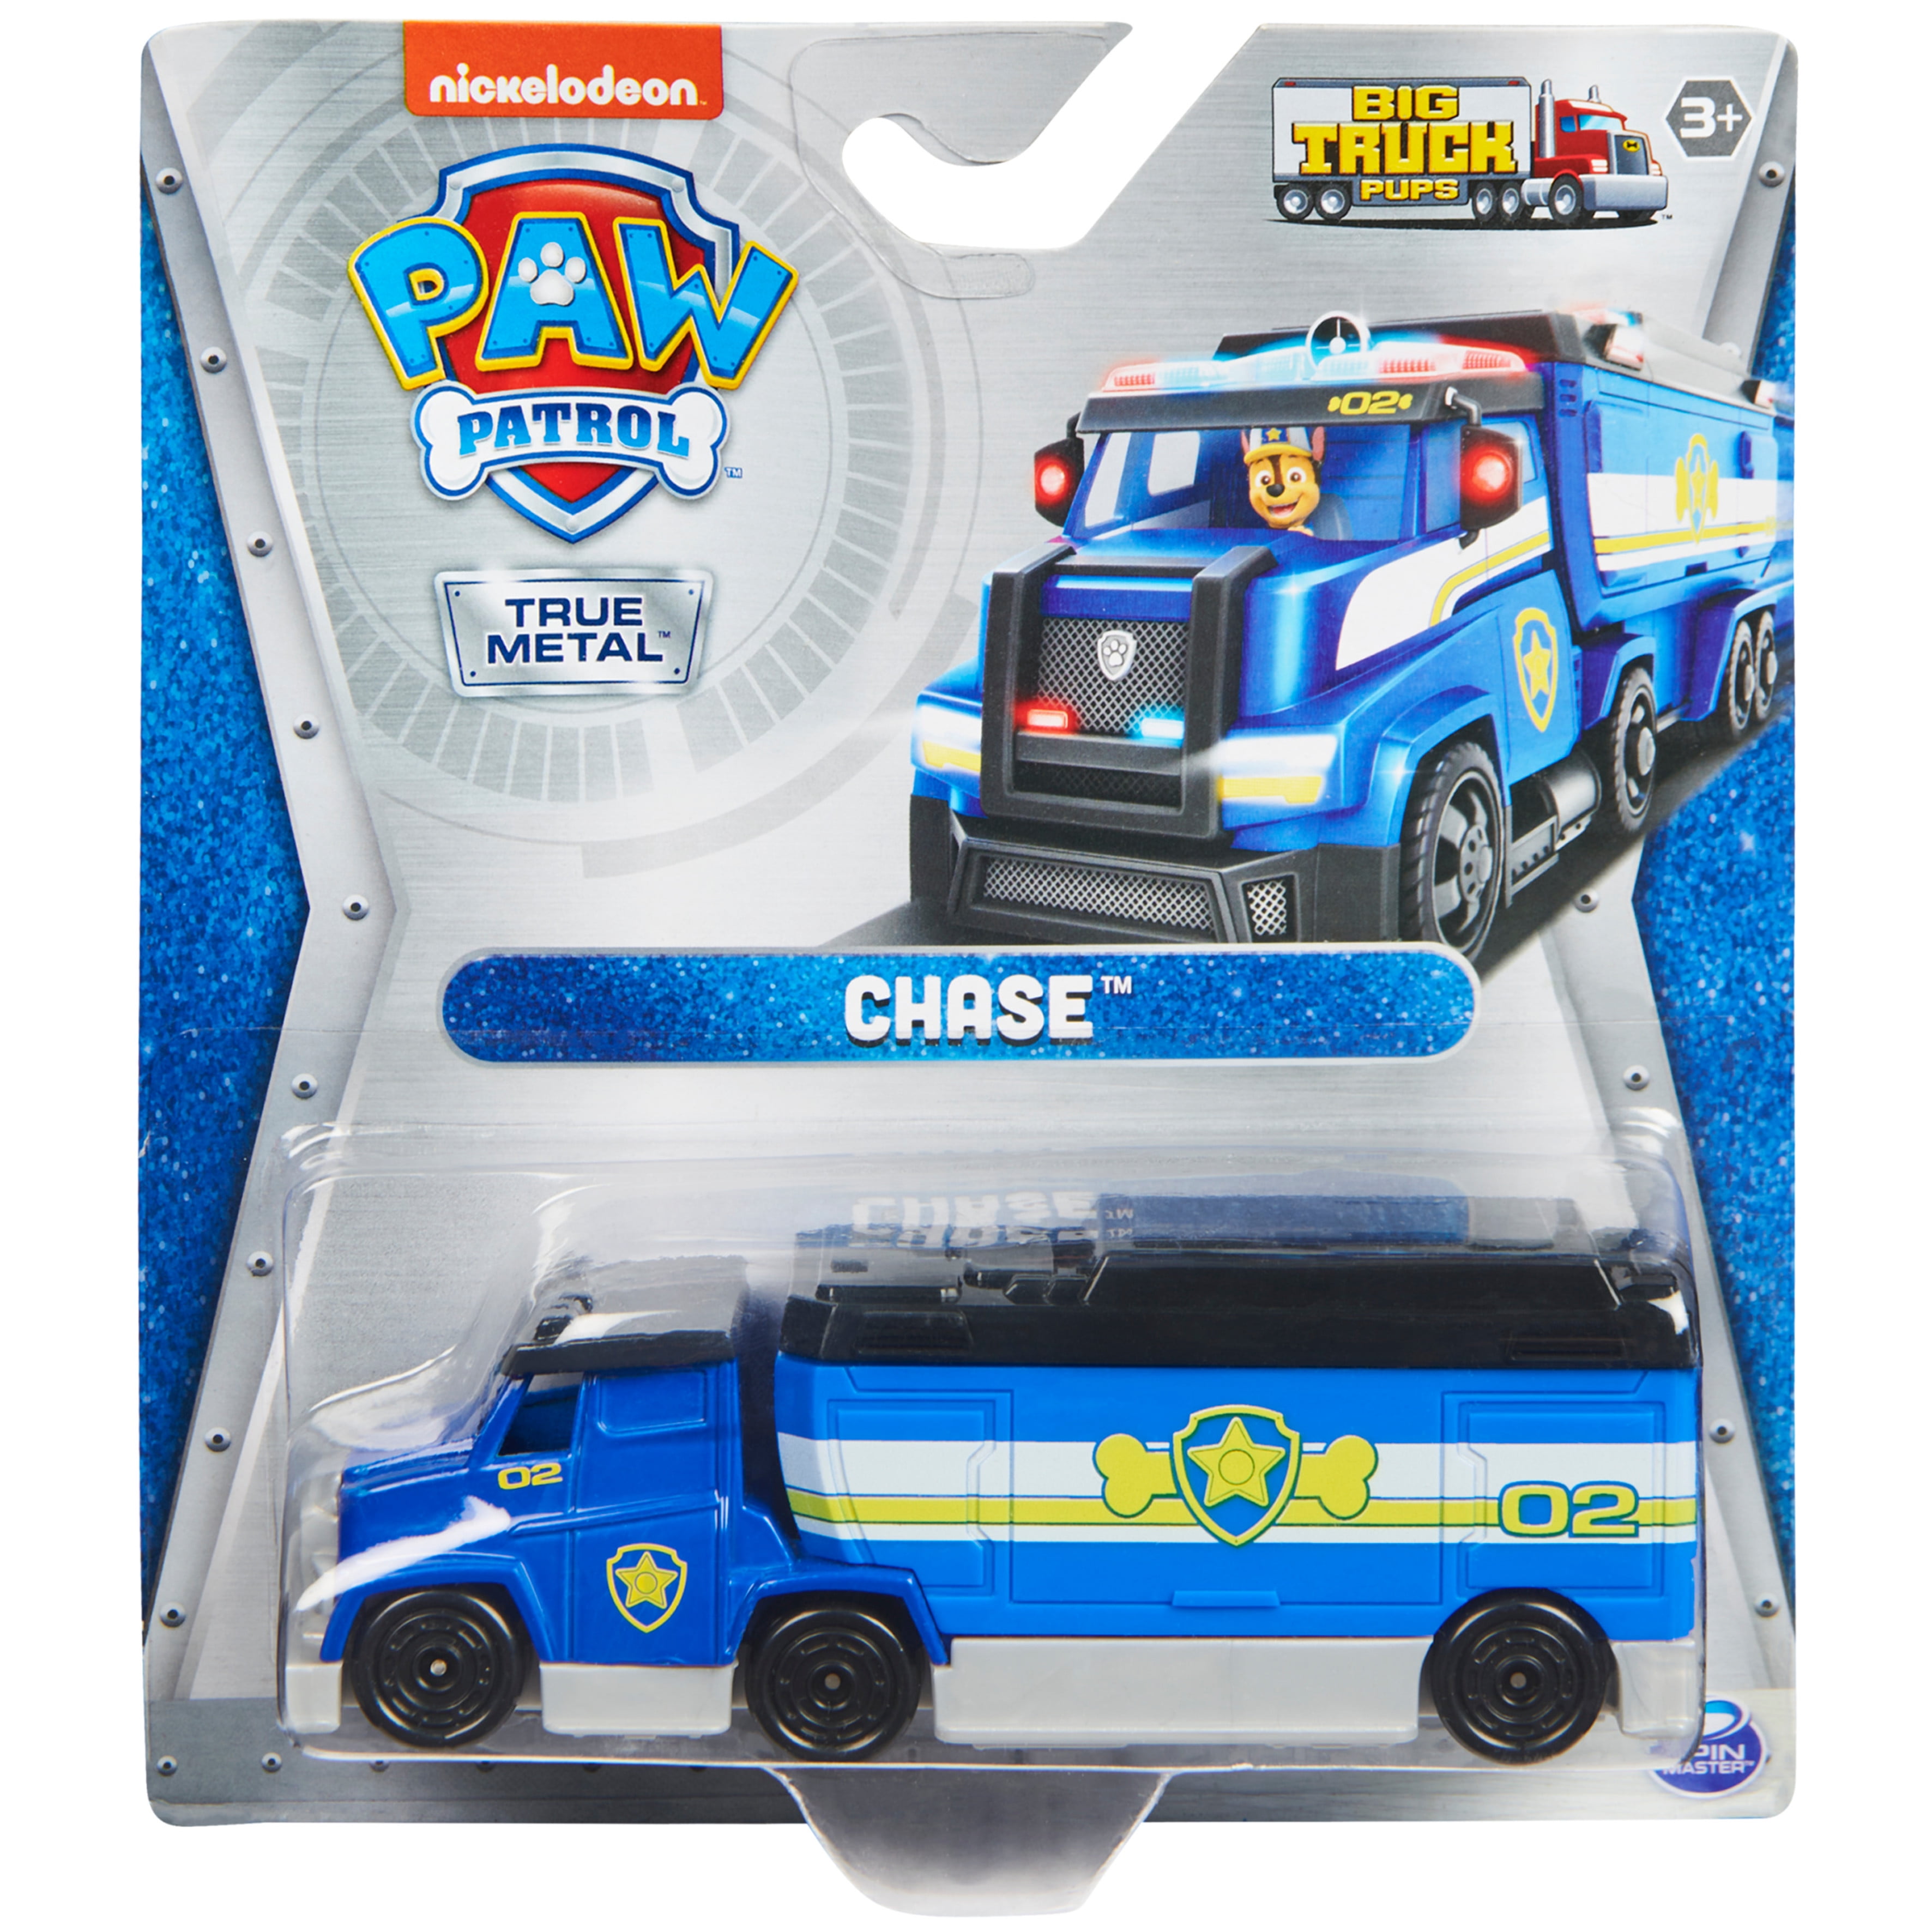 PAW Patrol, True Metal Chase Collectible Die-Cast Toy Trucks, Big Truck Pups Series 1:55 Scale